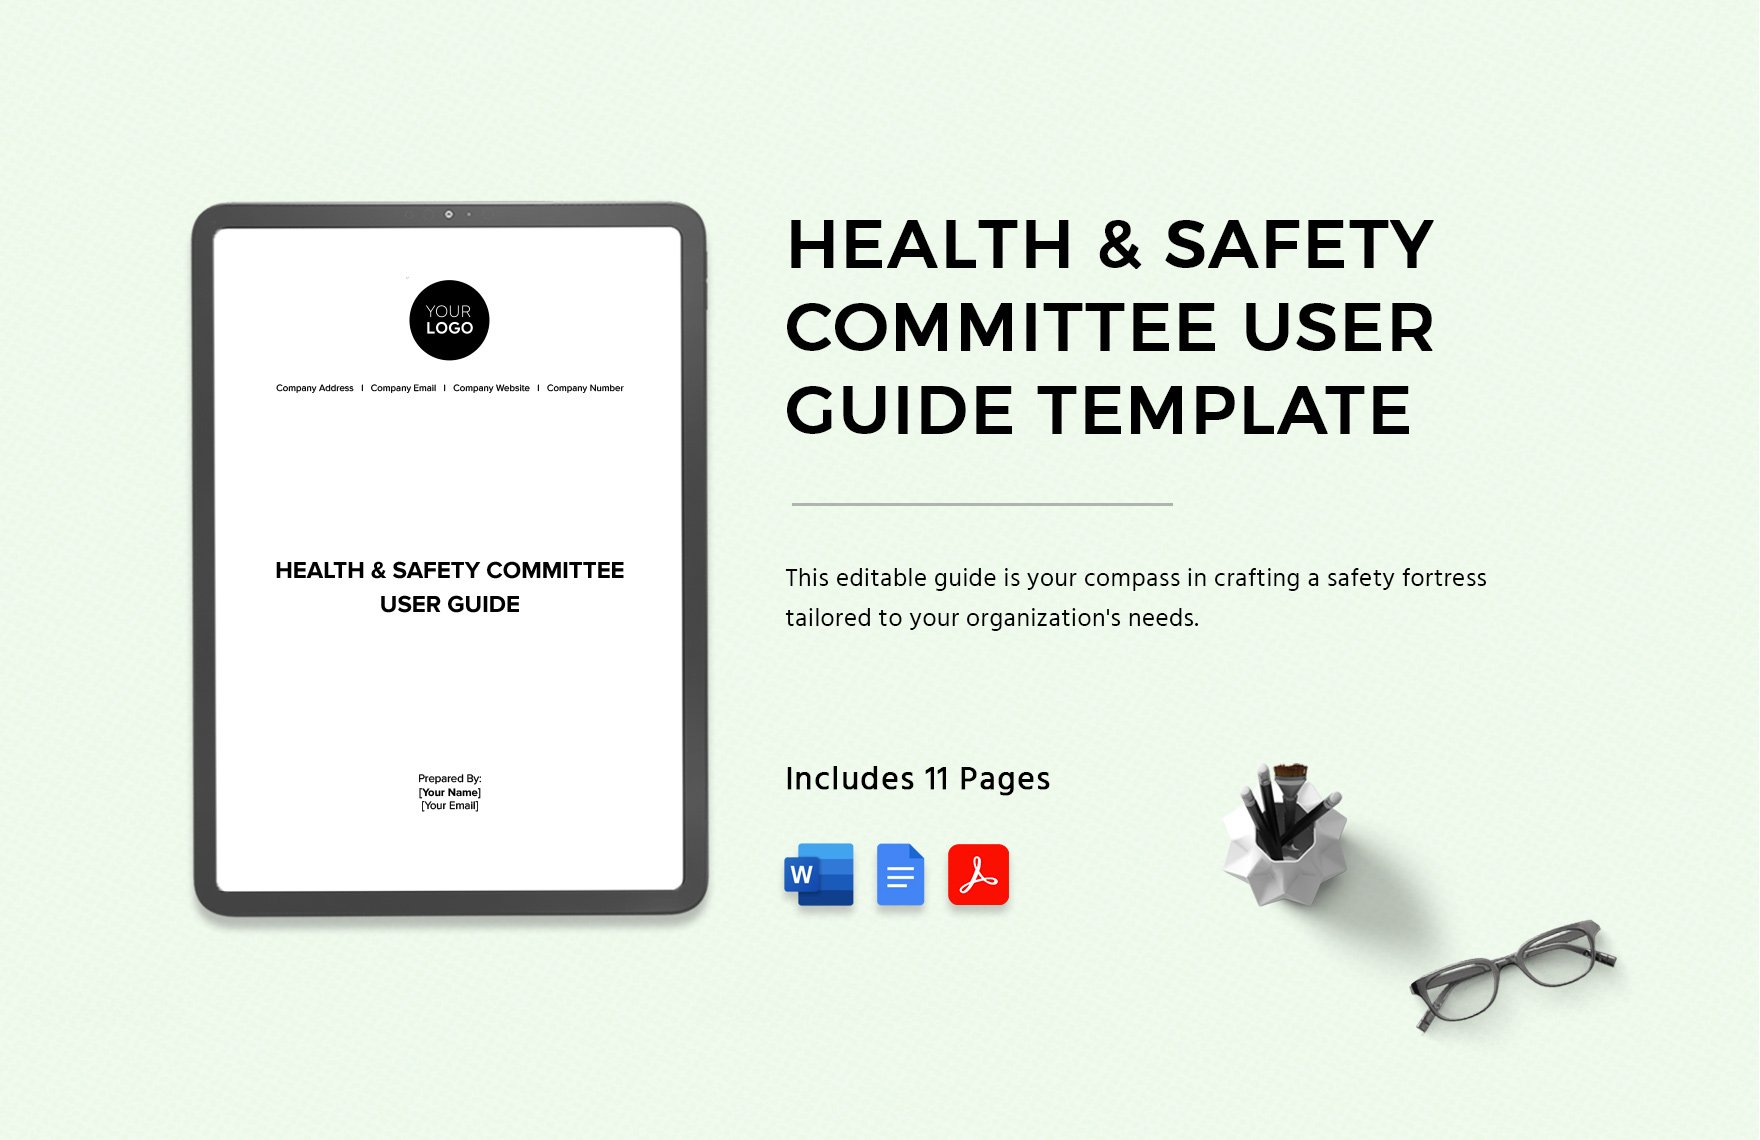 Health & Safety Committee User Guide Template